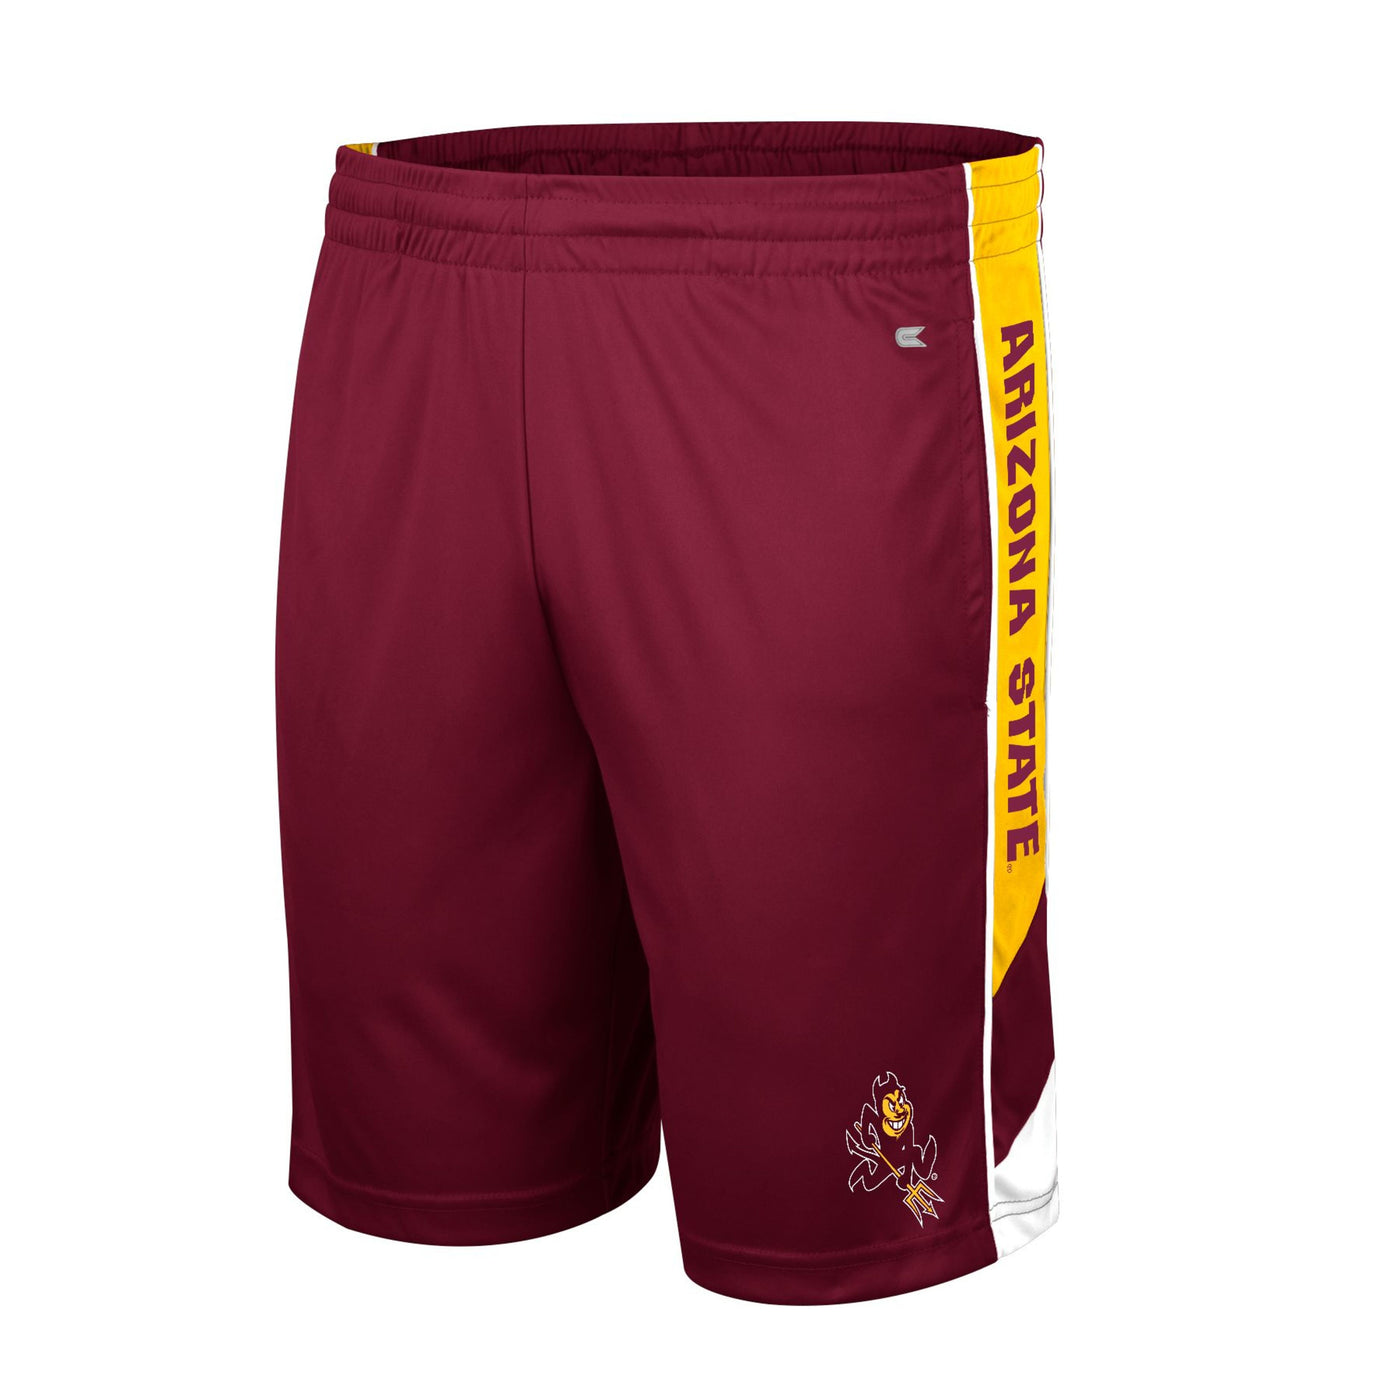 ASU maroon shorts with Sparky on the leg and a gold stripe down the hip